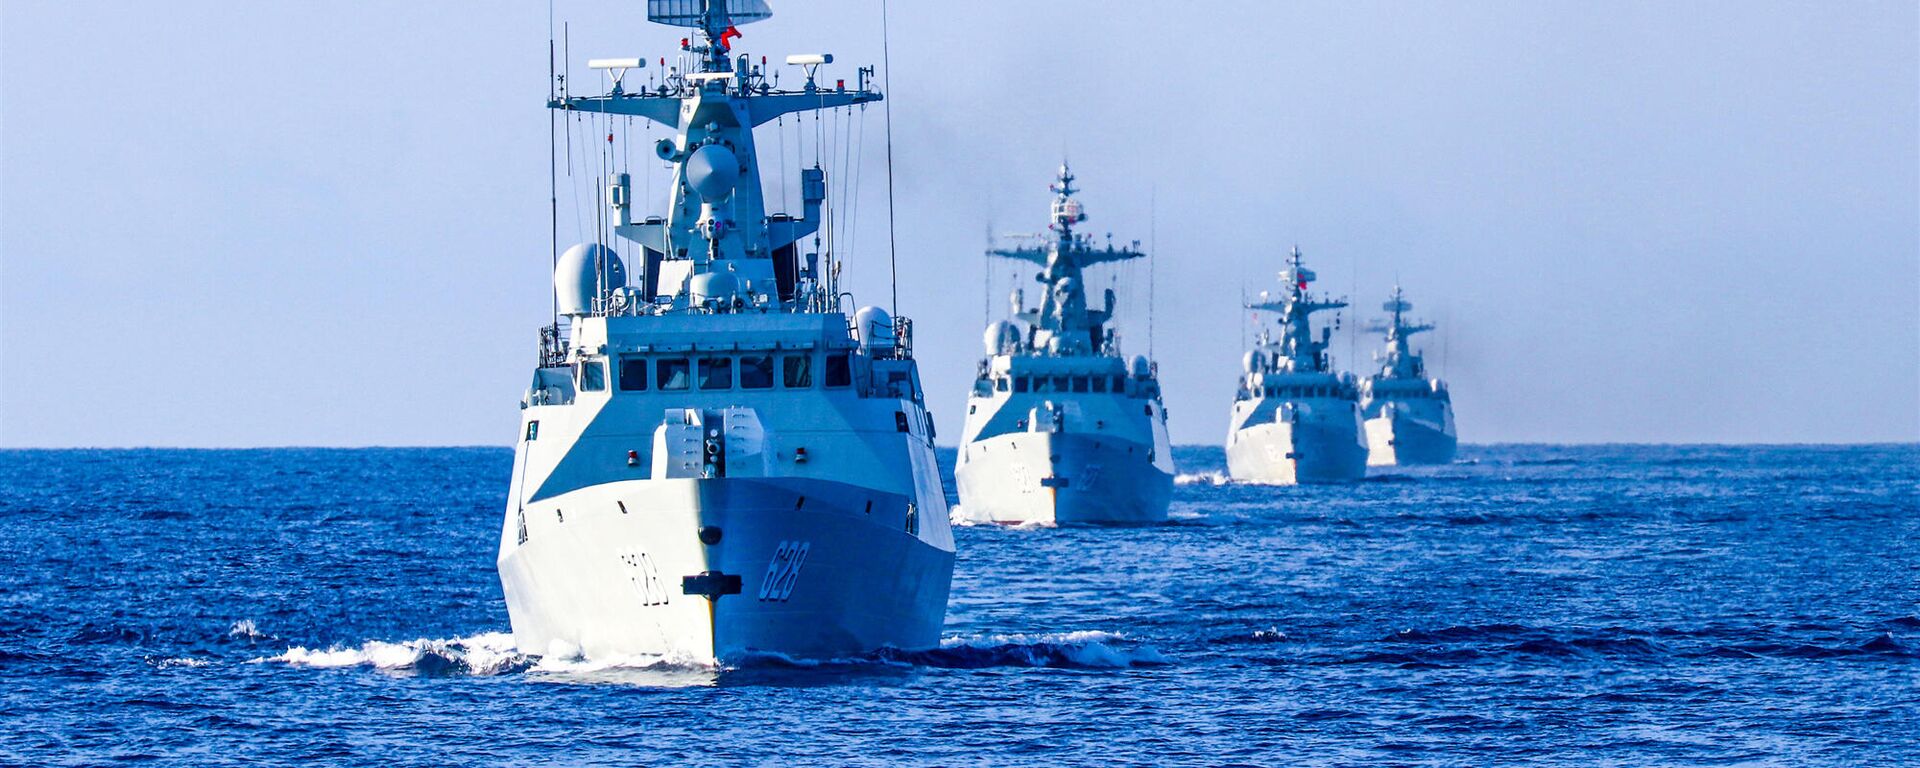 The frigate Enshi (Hull 627), Yongzhou (Hull 628), Bazhong (Hull 625), and Wuzhou (Hull 626) steam in formation during a 9-day maritime training exercise in waters of the South China Sea in late November, 2020. They are attached to a frigate flotilla of the navy under the PLA Southern Theater Command. - Sputnik International, 1920, 26.09.2023